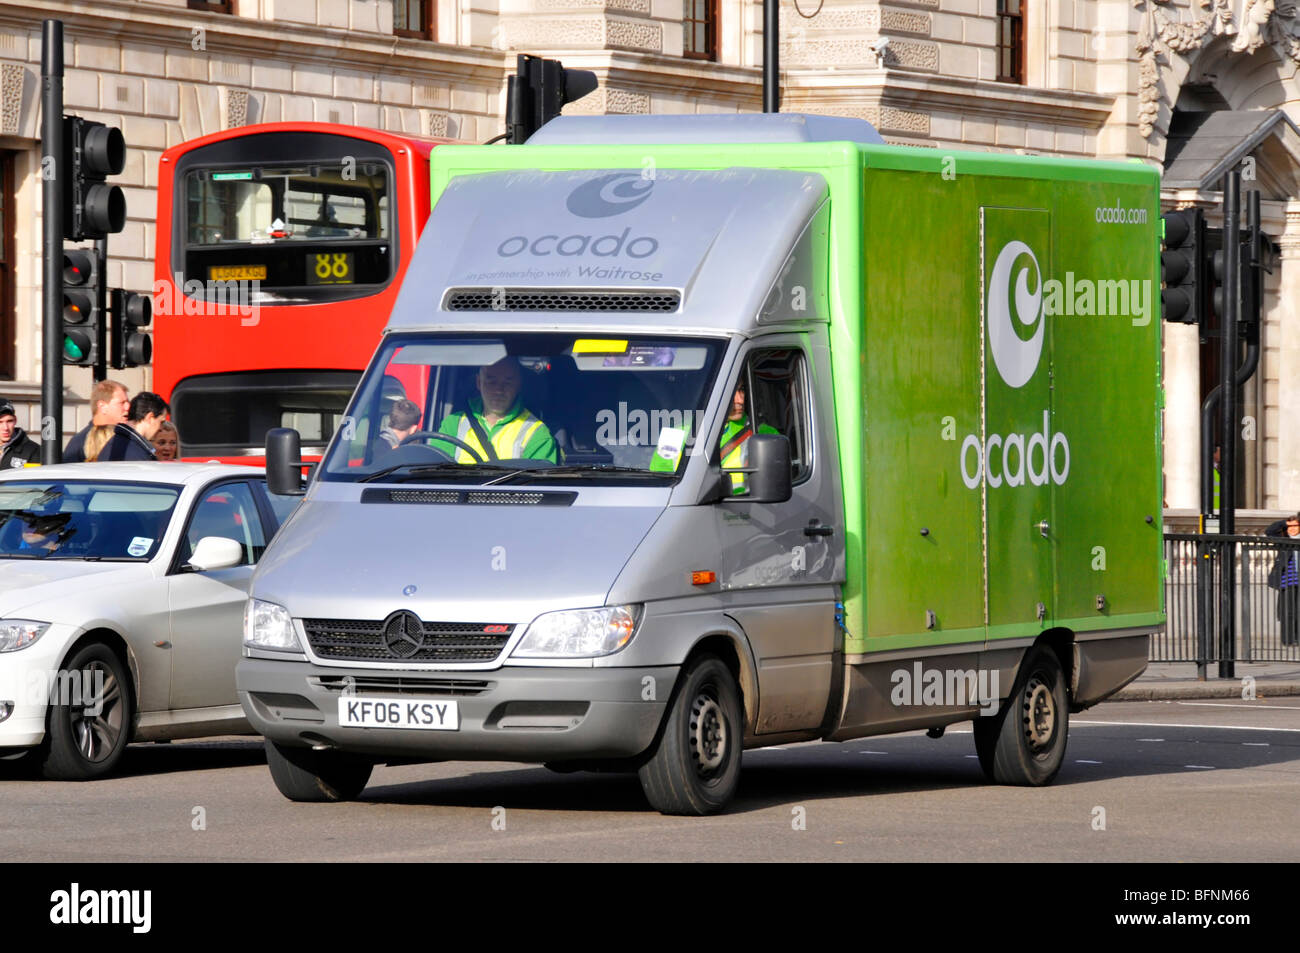 Ocado online supermarket business food supply chain grocery delivery van driver and mate driving in Whitehall London England UK Stock Photo